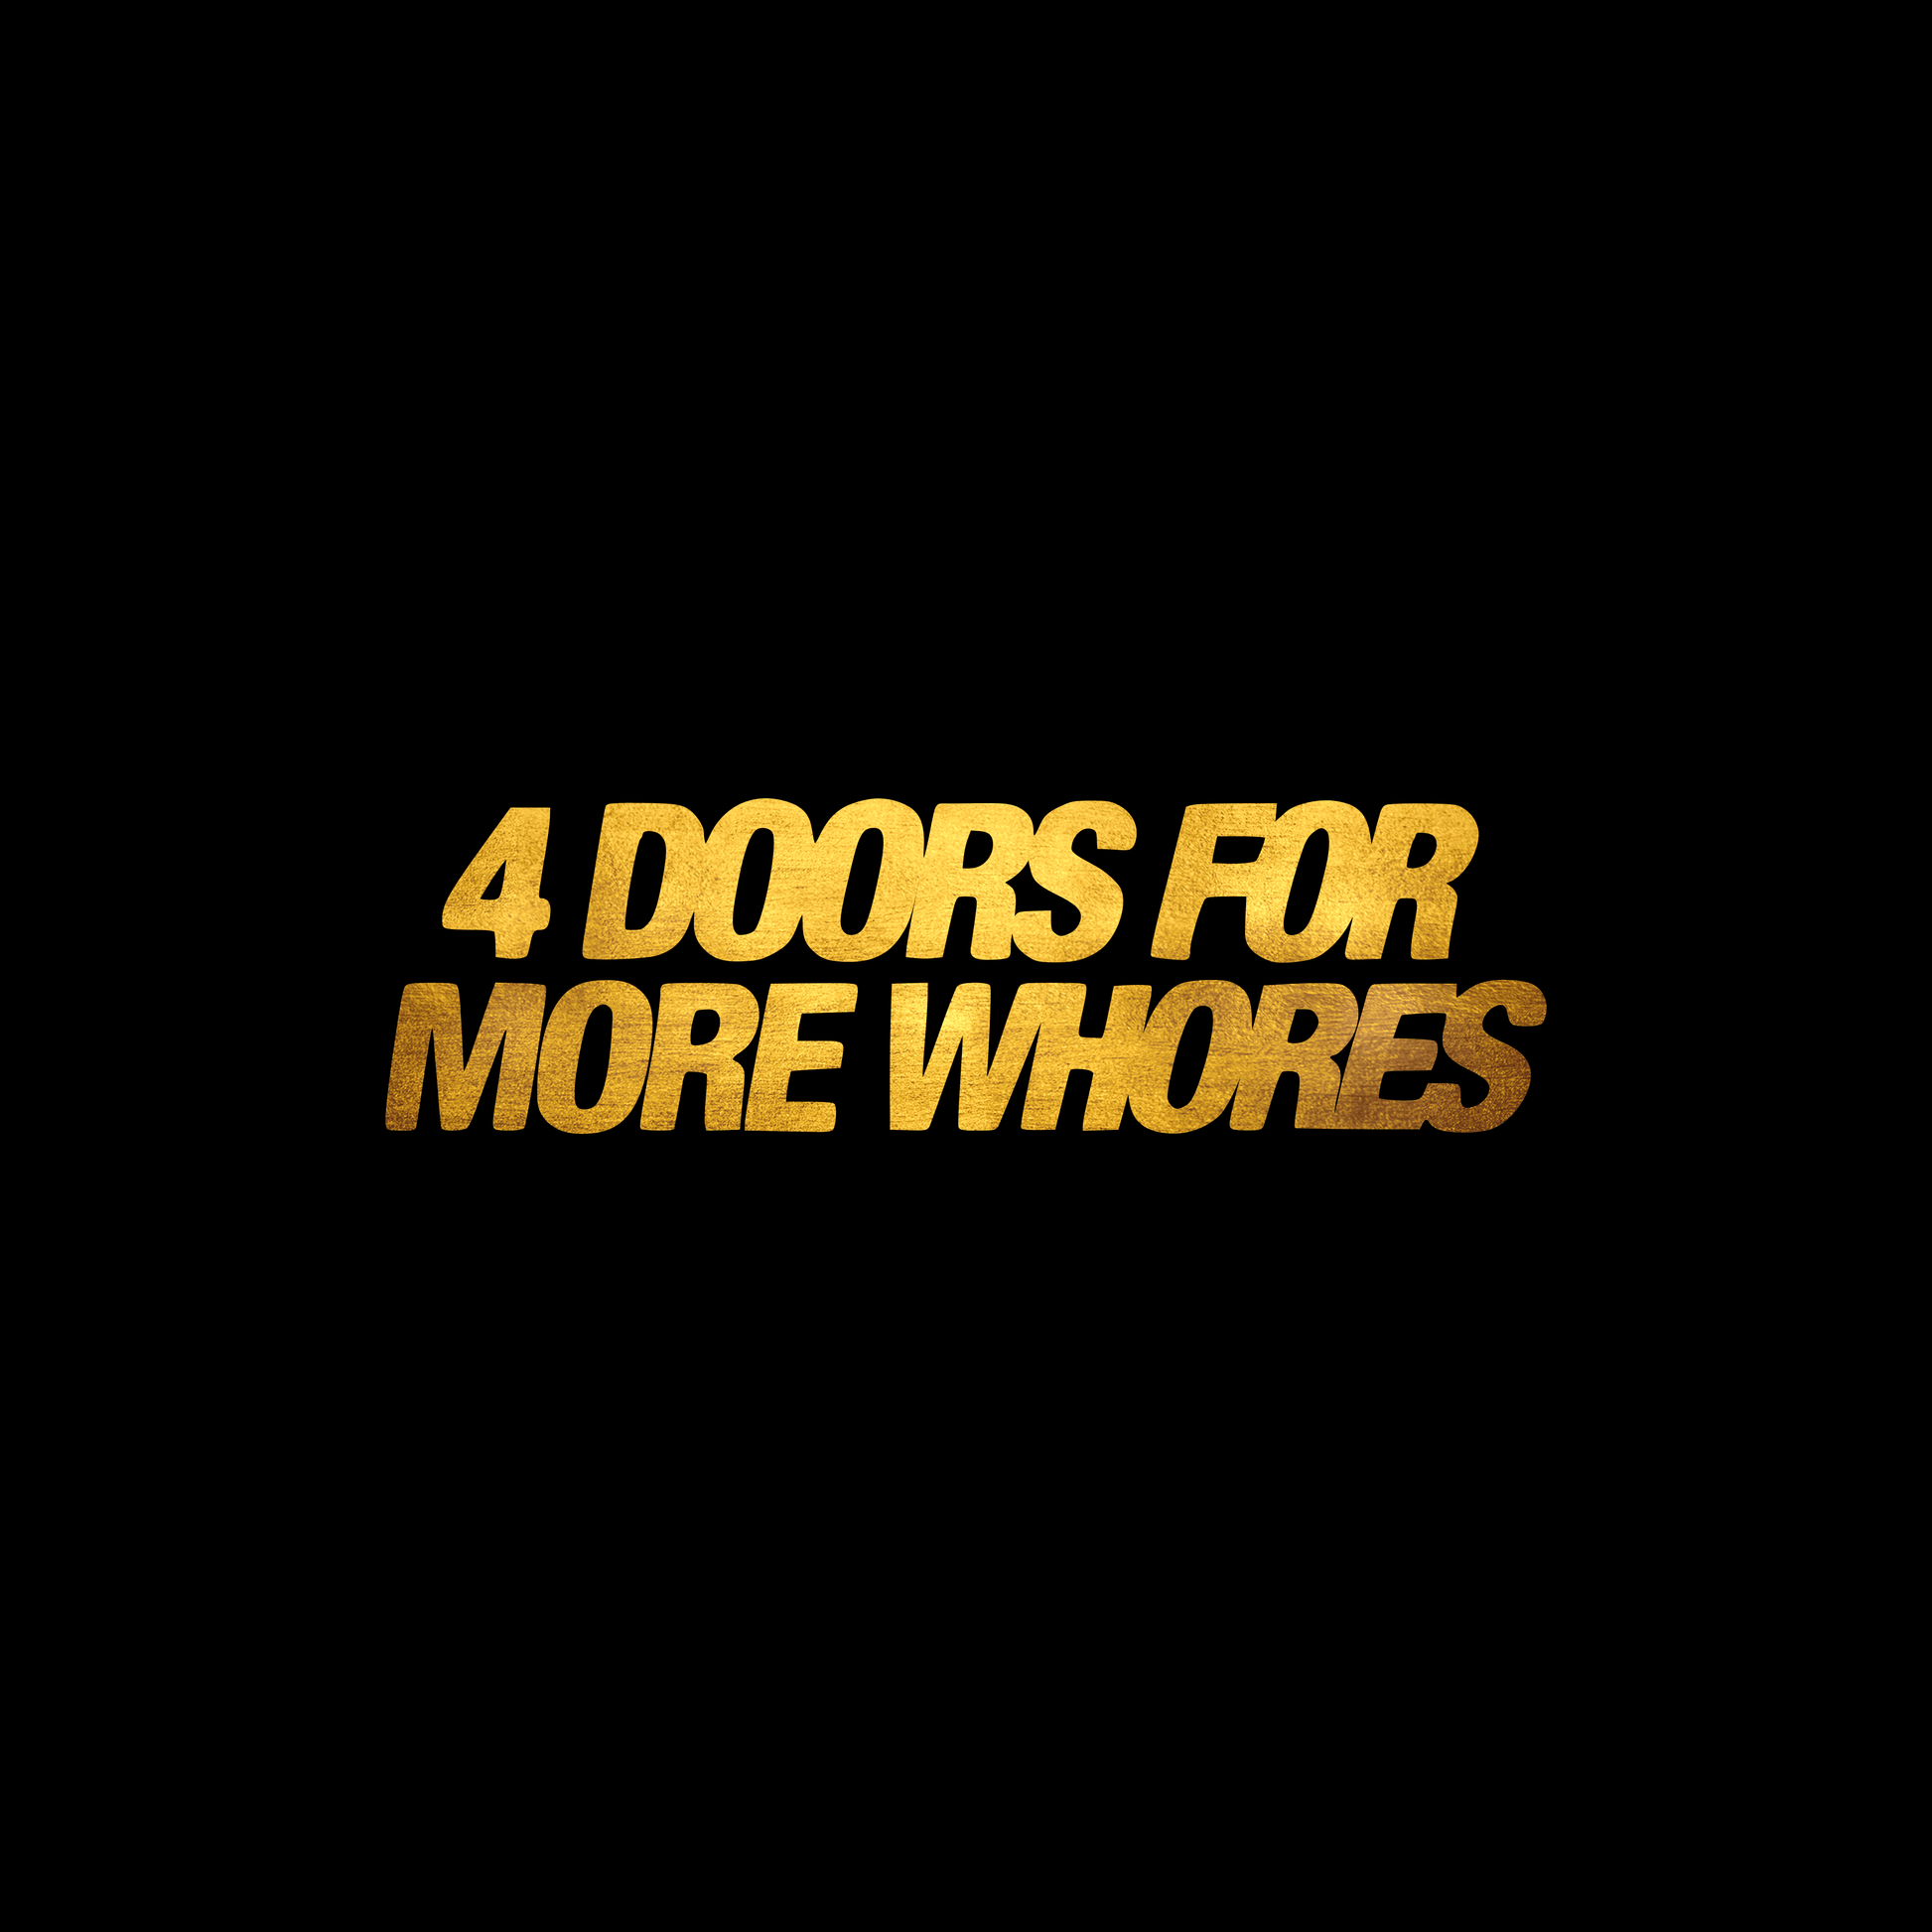 4 doors for more whores sticker decal